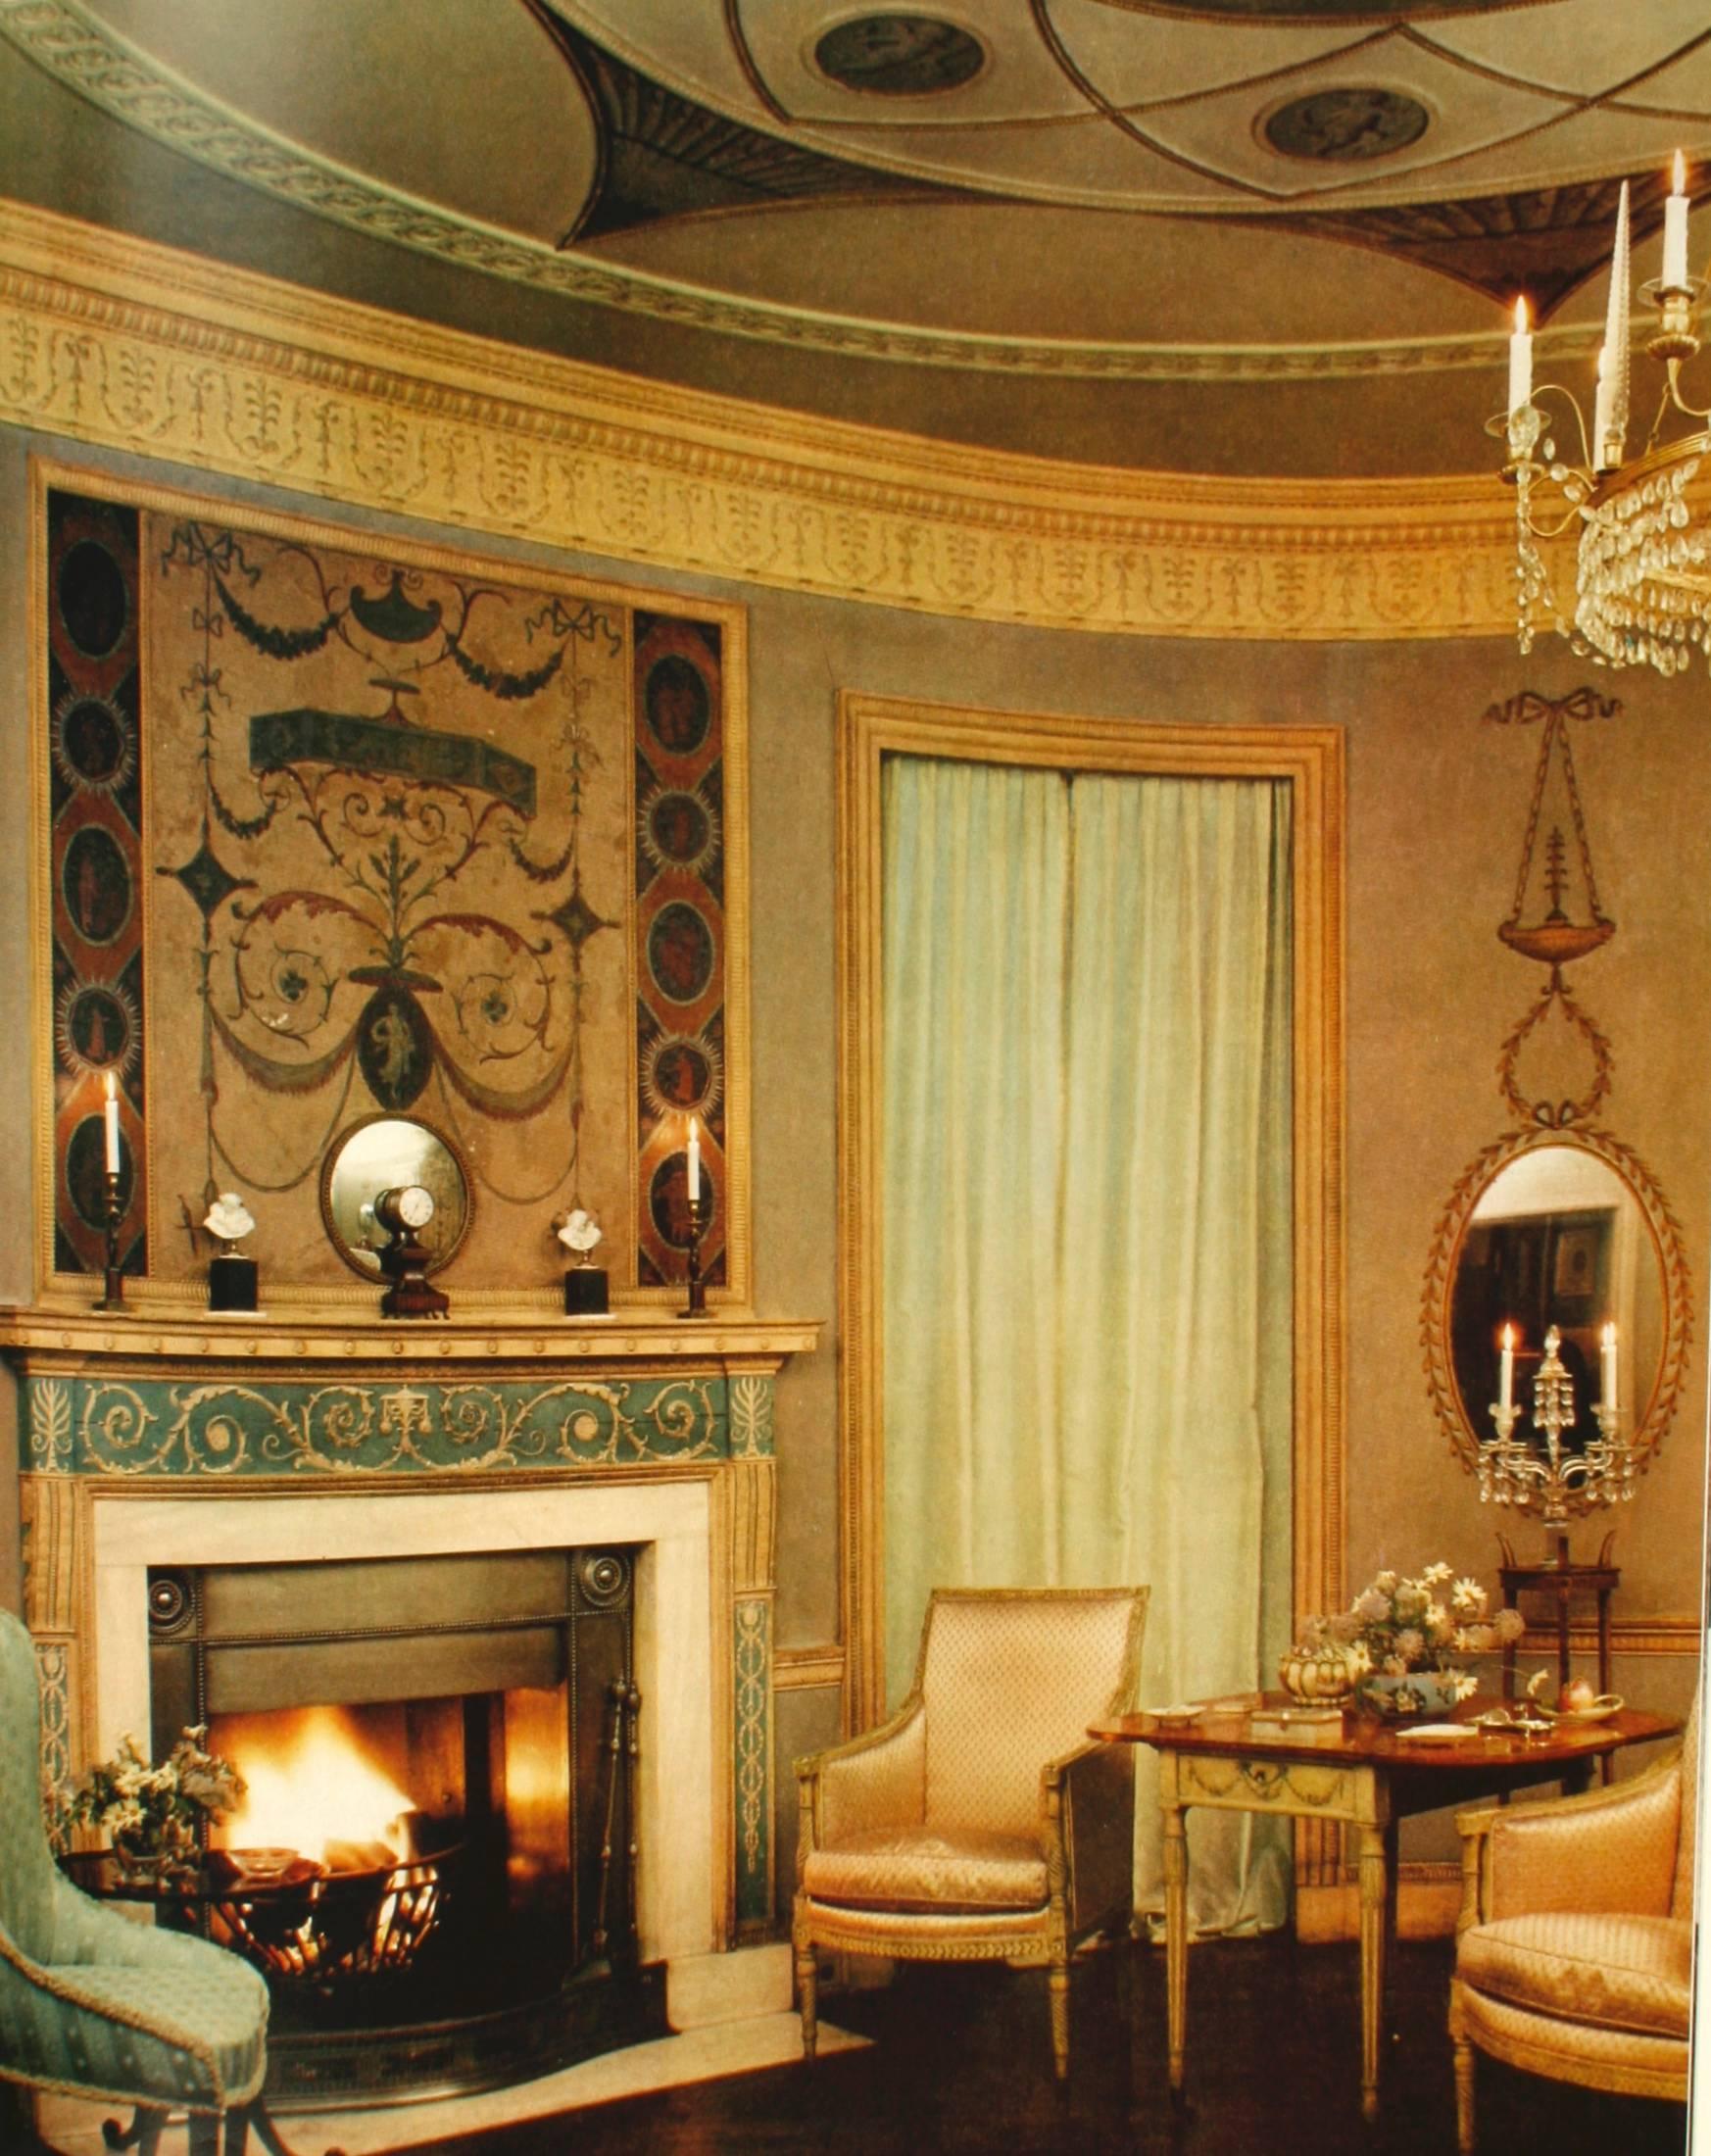 Paper Finest Rooms by America's Great Decorators by Katharine Tweed